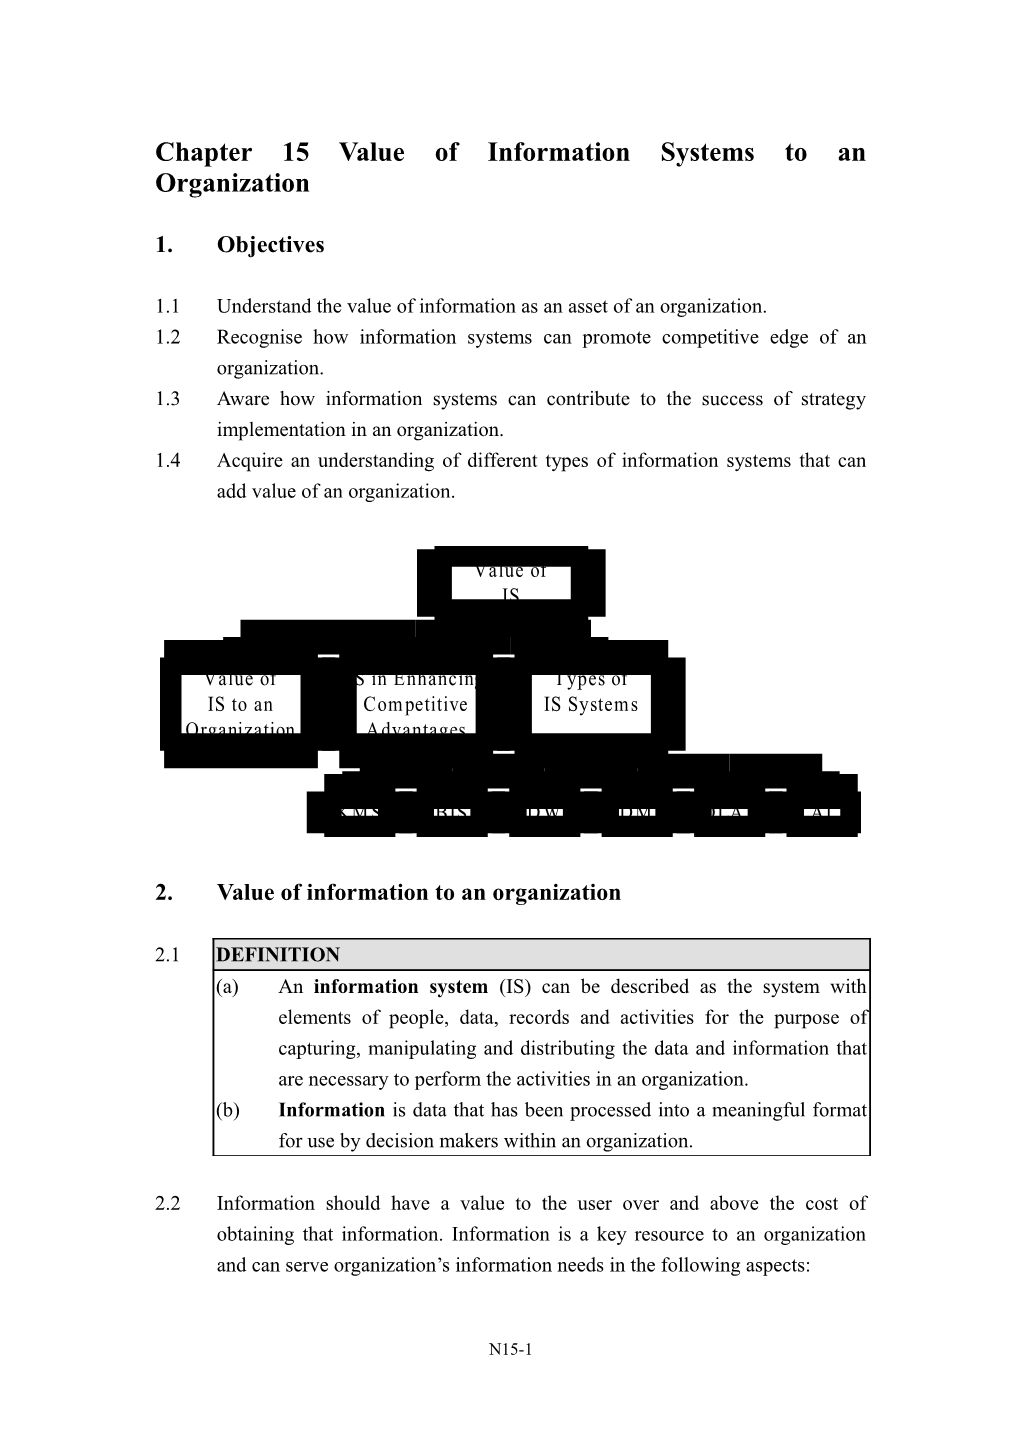 Chapter 14 Value Of Information Systems To An Organization